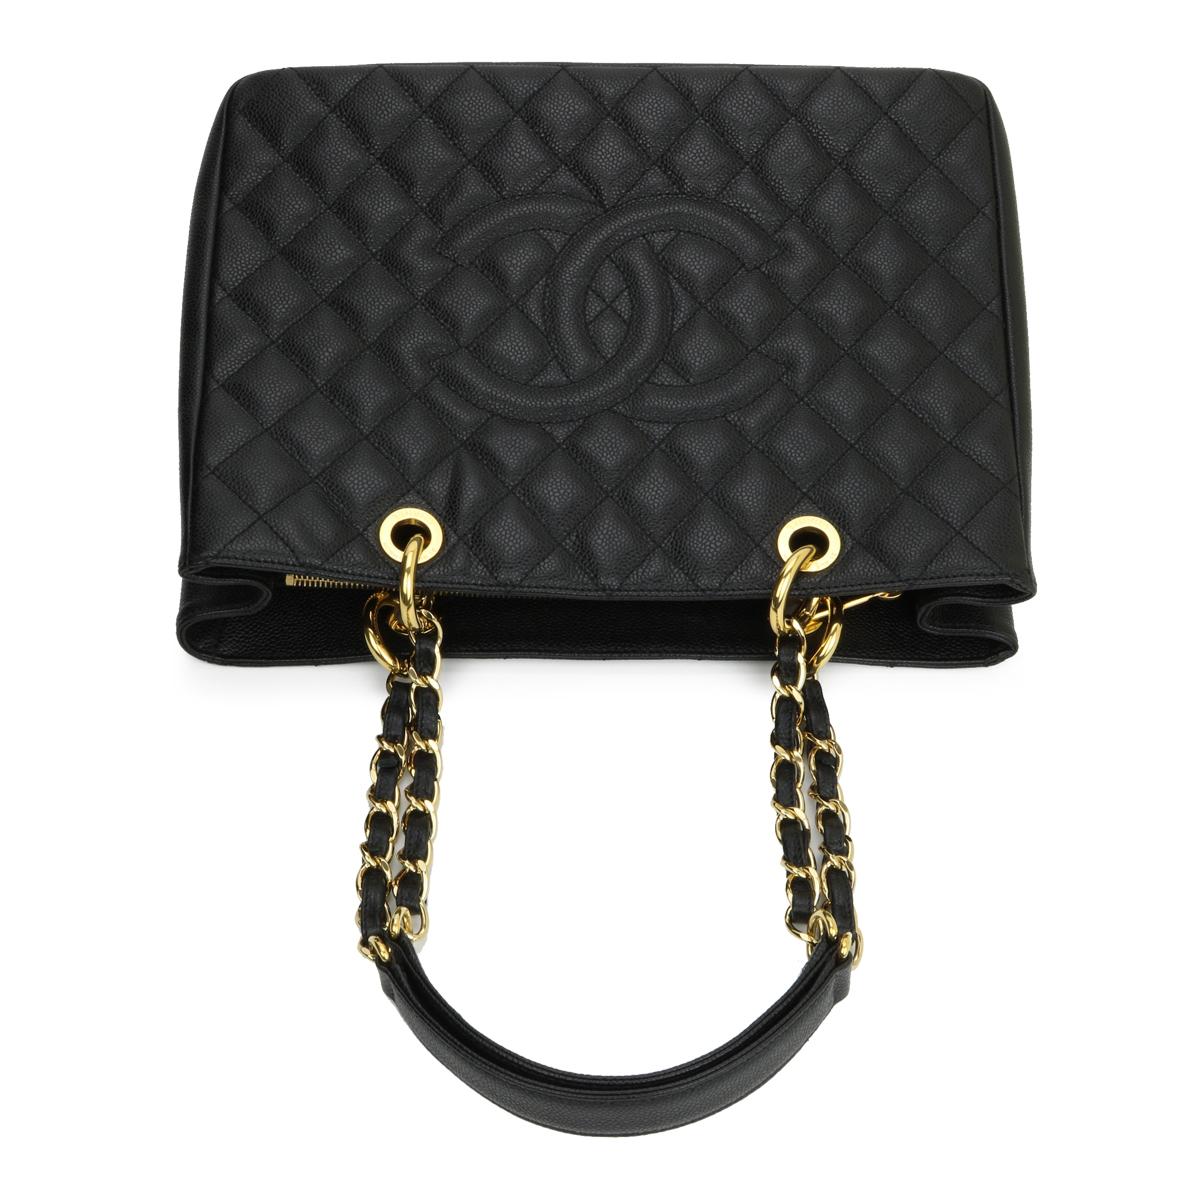 CHANEL Grand Shopping Tote (GST) Bag Black Caviar with Gold Hardware 2013 4